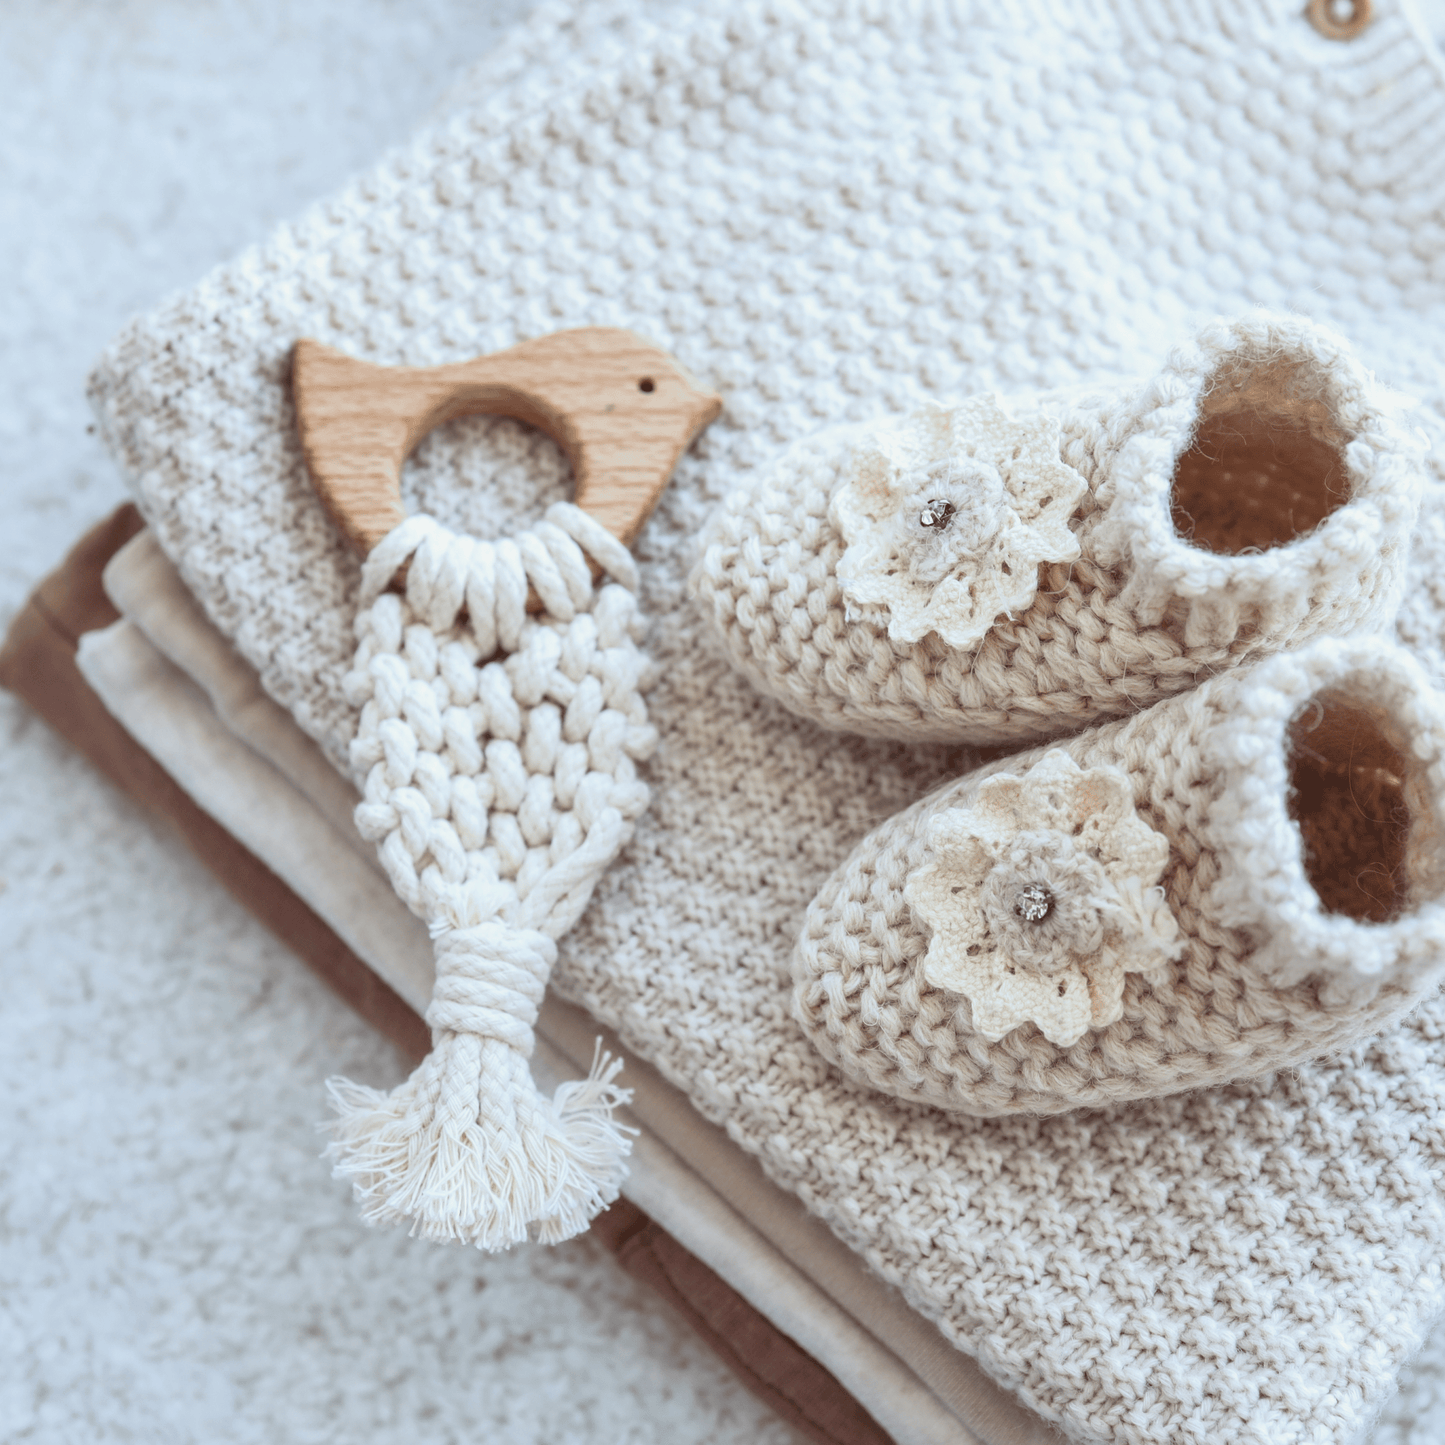 6-Month-Prepaid Hooks & Needles Subscription Box #3 with floral embellishments, a wooden bird-shaped teether, and folded knitted clothes on a soft surface.